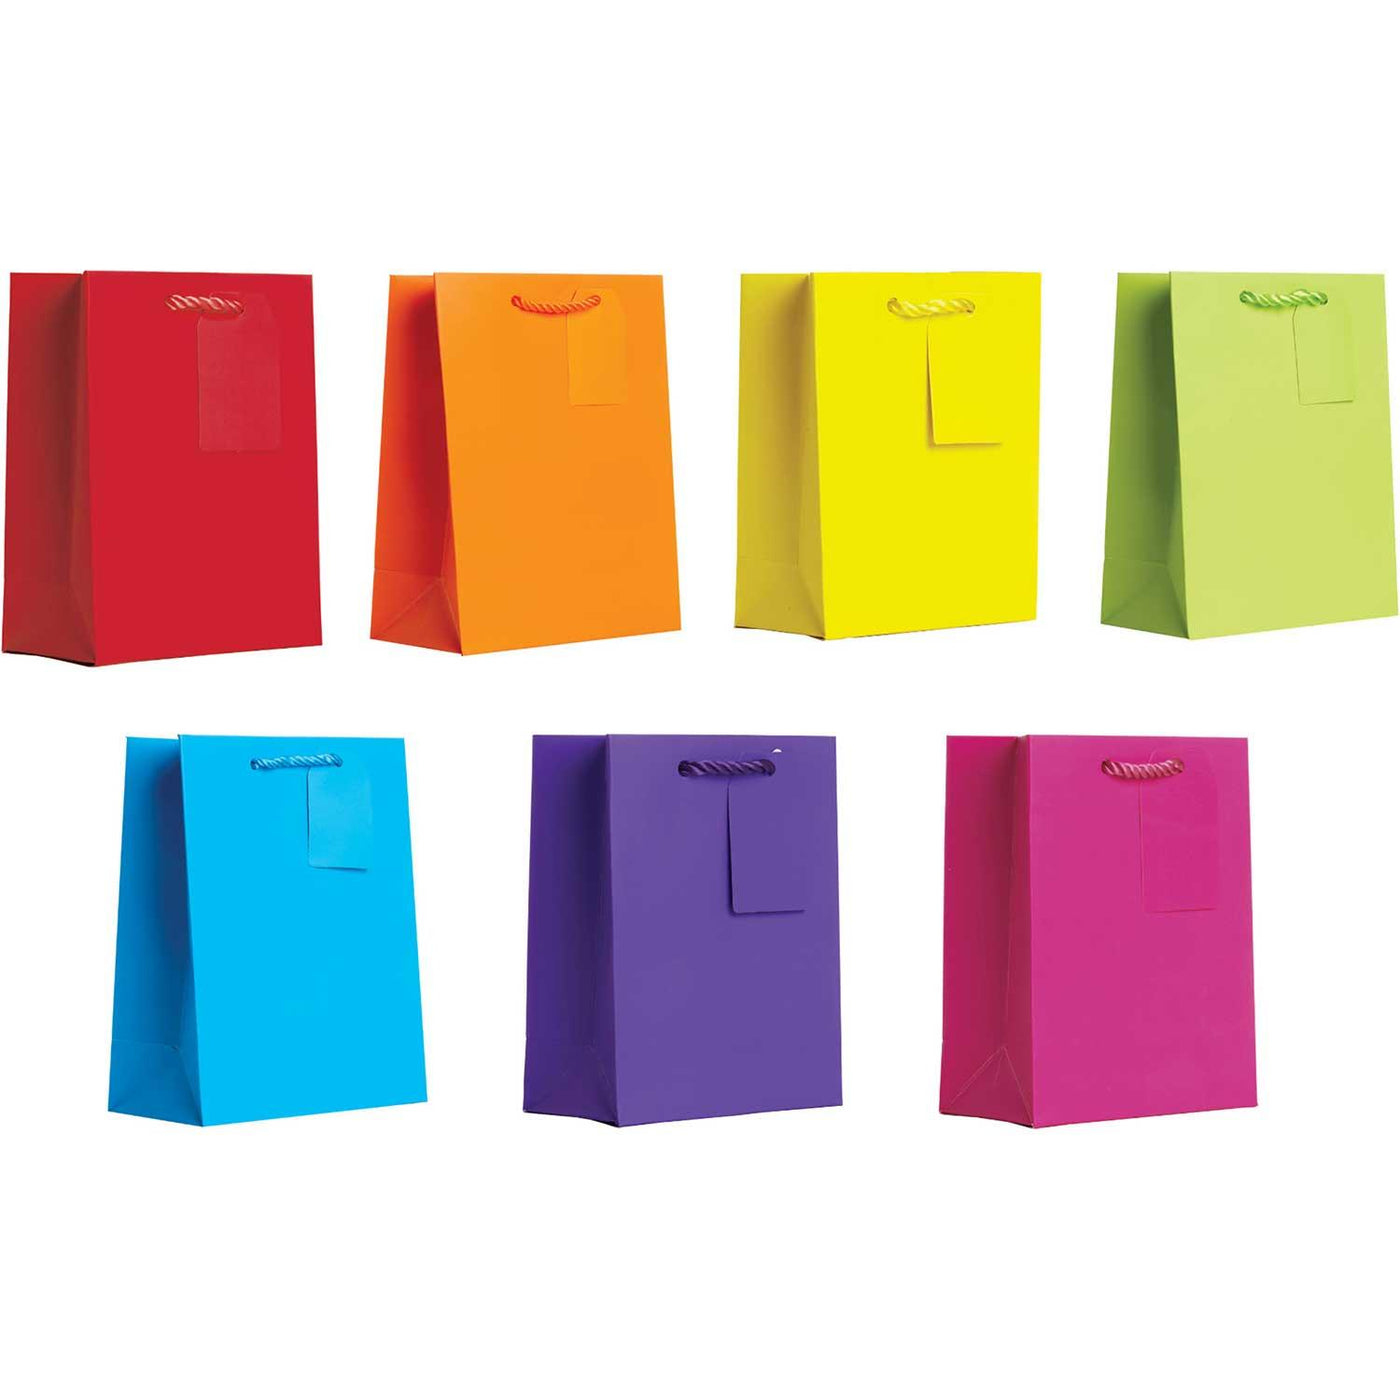 All Occasion Bright Rainbow Medium Solid Paper Gift Bags (7 Pack) by Present Paper - Vysn